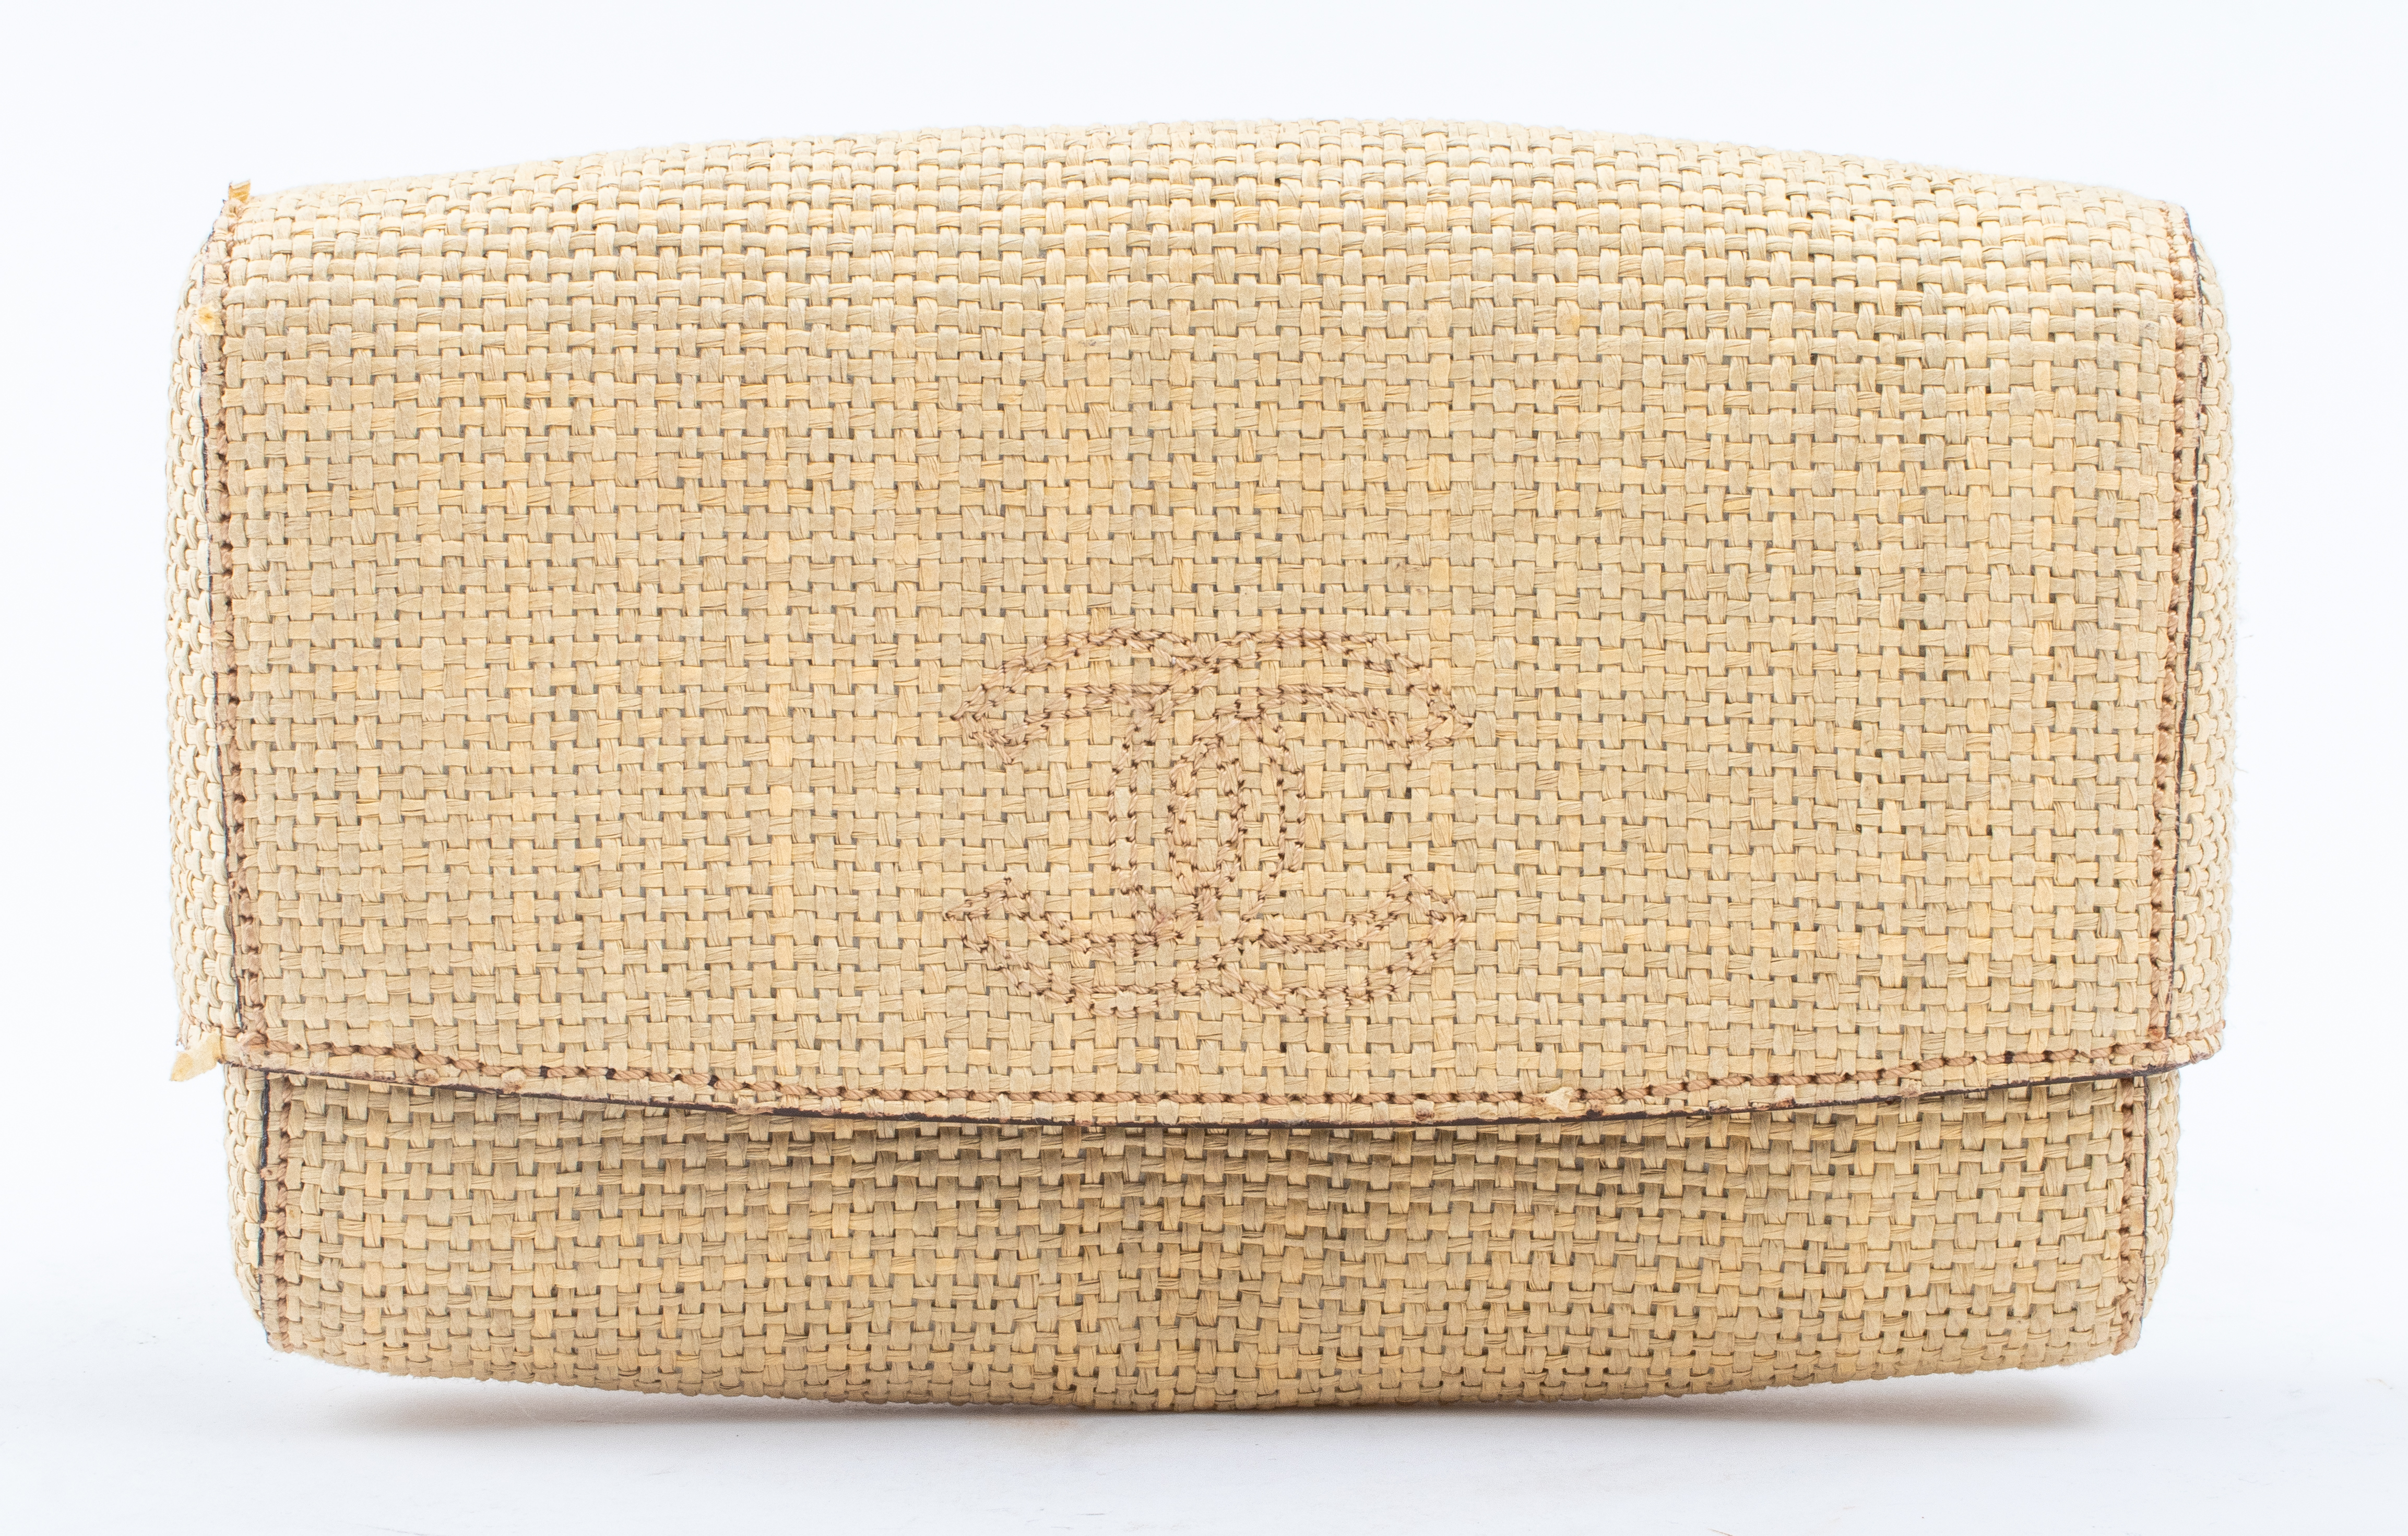 CHANEL WOVEN CANE BROWN LEATHER 2be28f